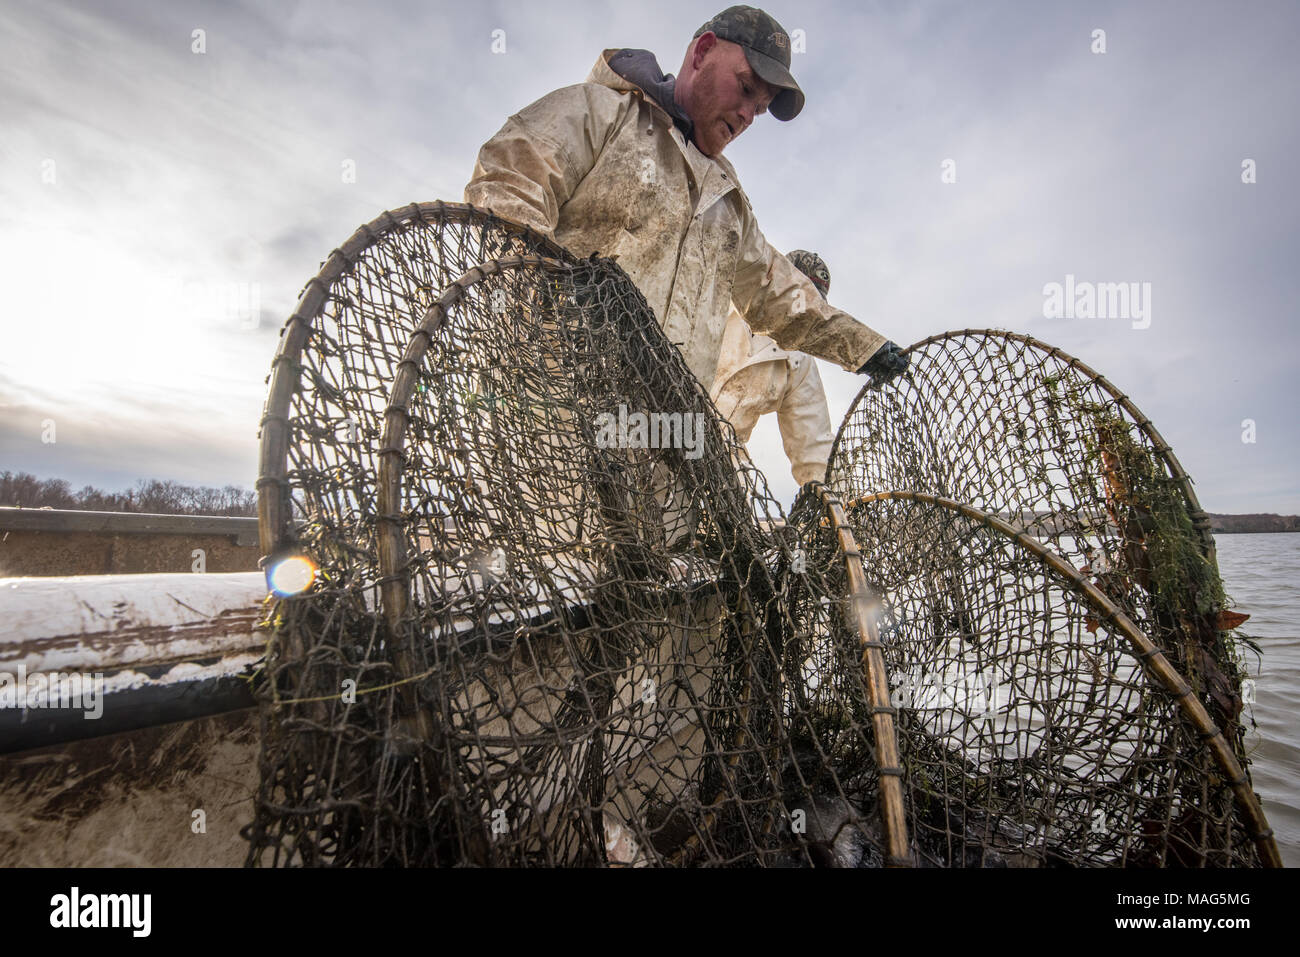 Fishermen pulling in a hoop net of blue catfish on the Potomac River near Fort Washington, Maryland Stock Photo